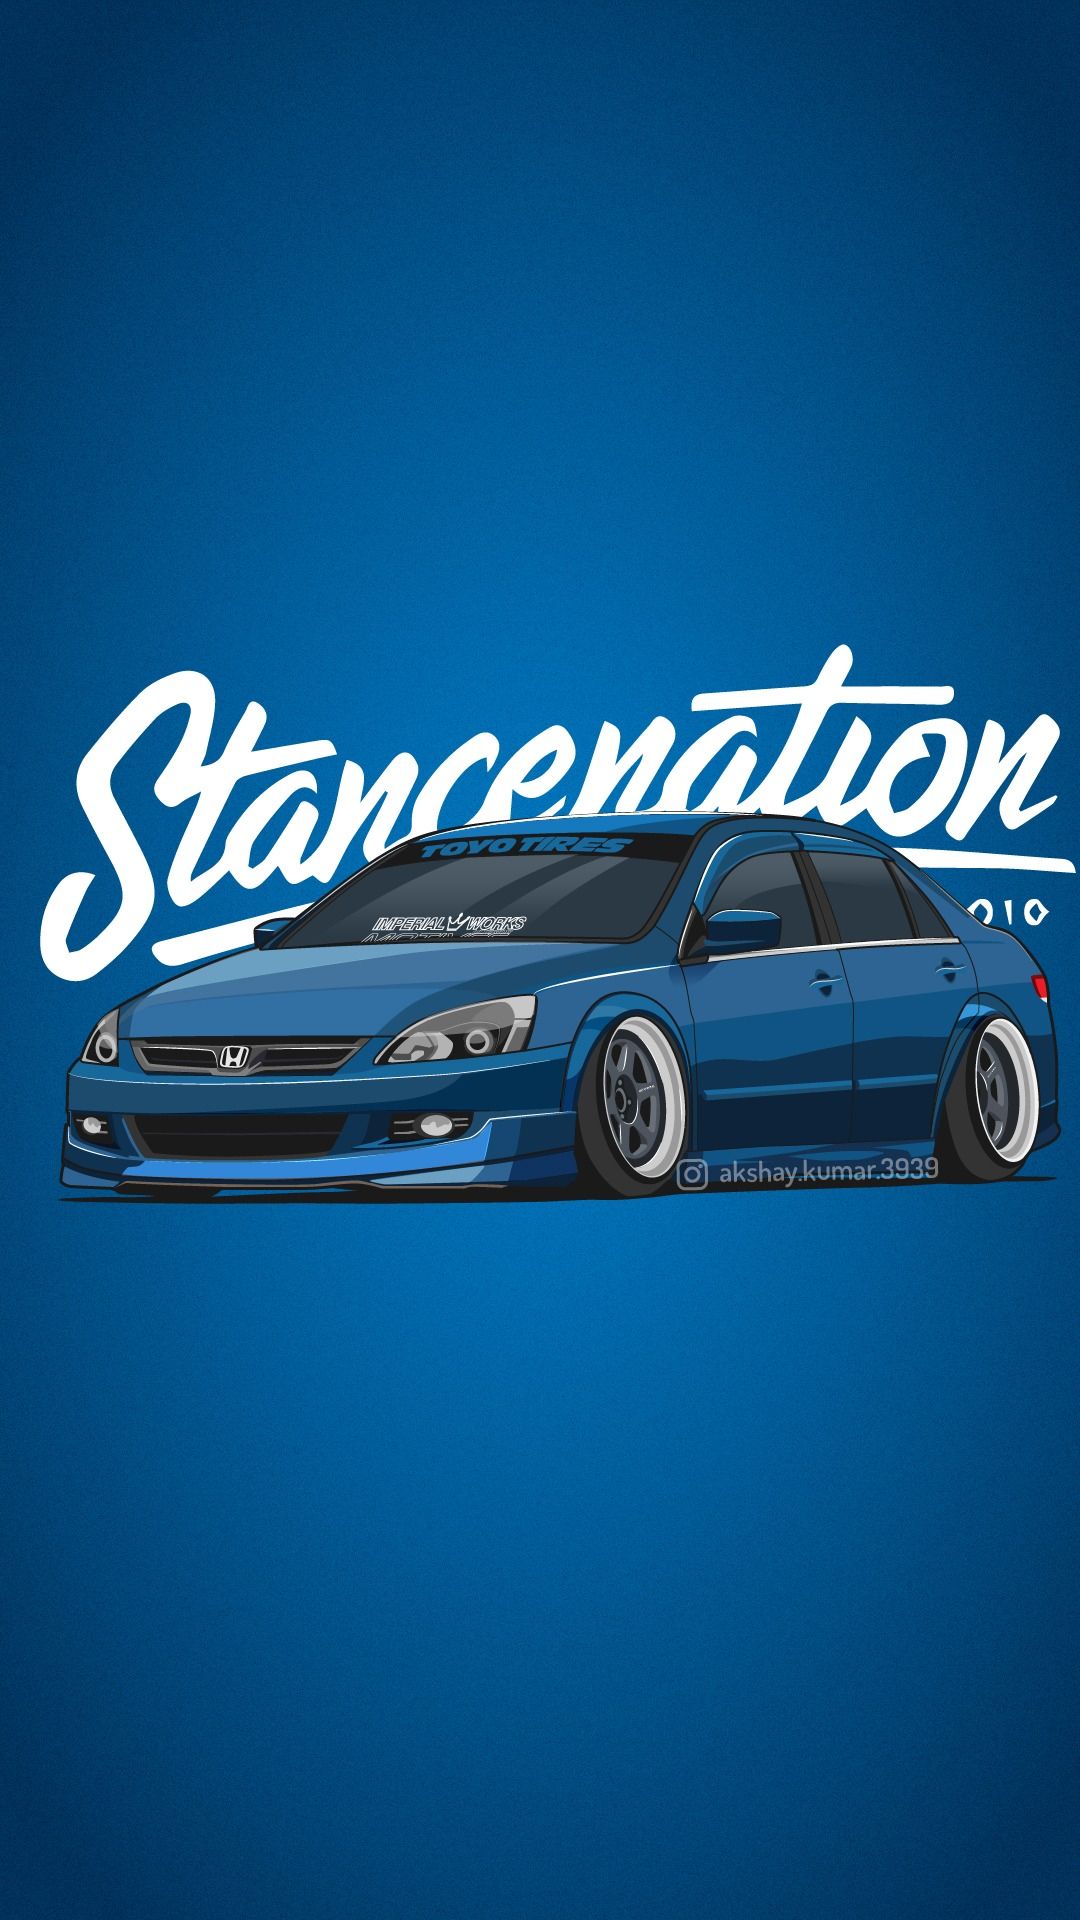 Honda Accord Vector Art. JDM Wallpaper. Stancenation Owner His Instagram channel -. . For more such Indian Cars Vector Artwork